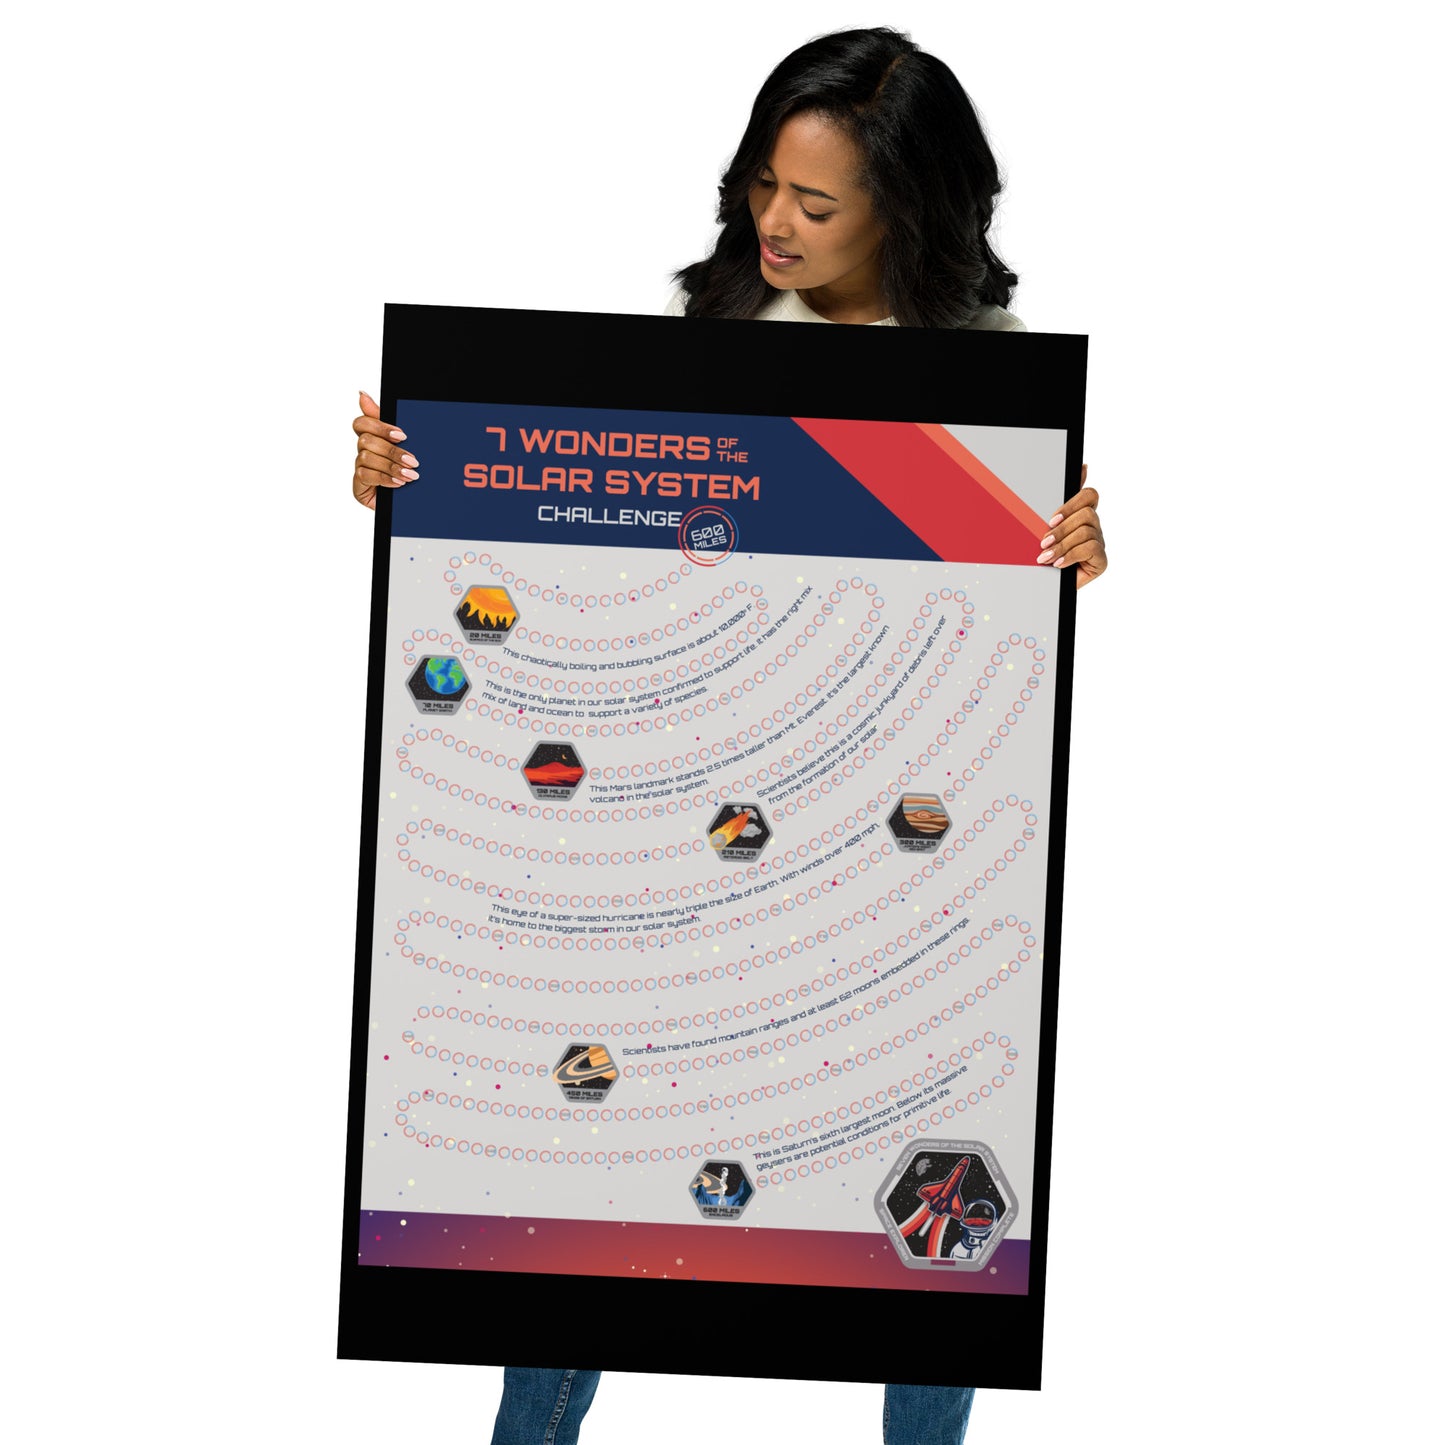 7 Wonders of the Solar System 600 Mile Challenge Tracker Poster